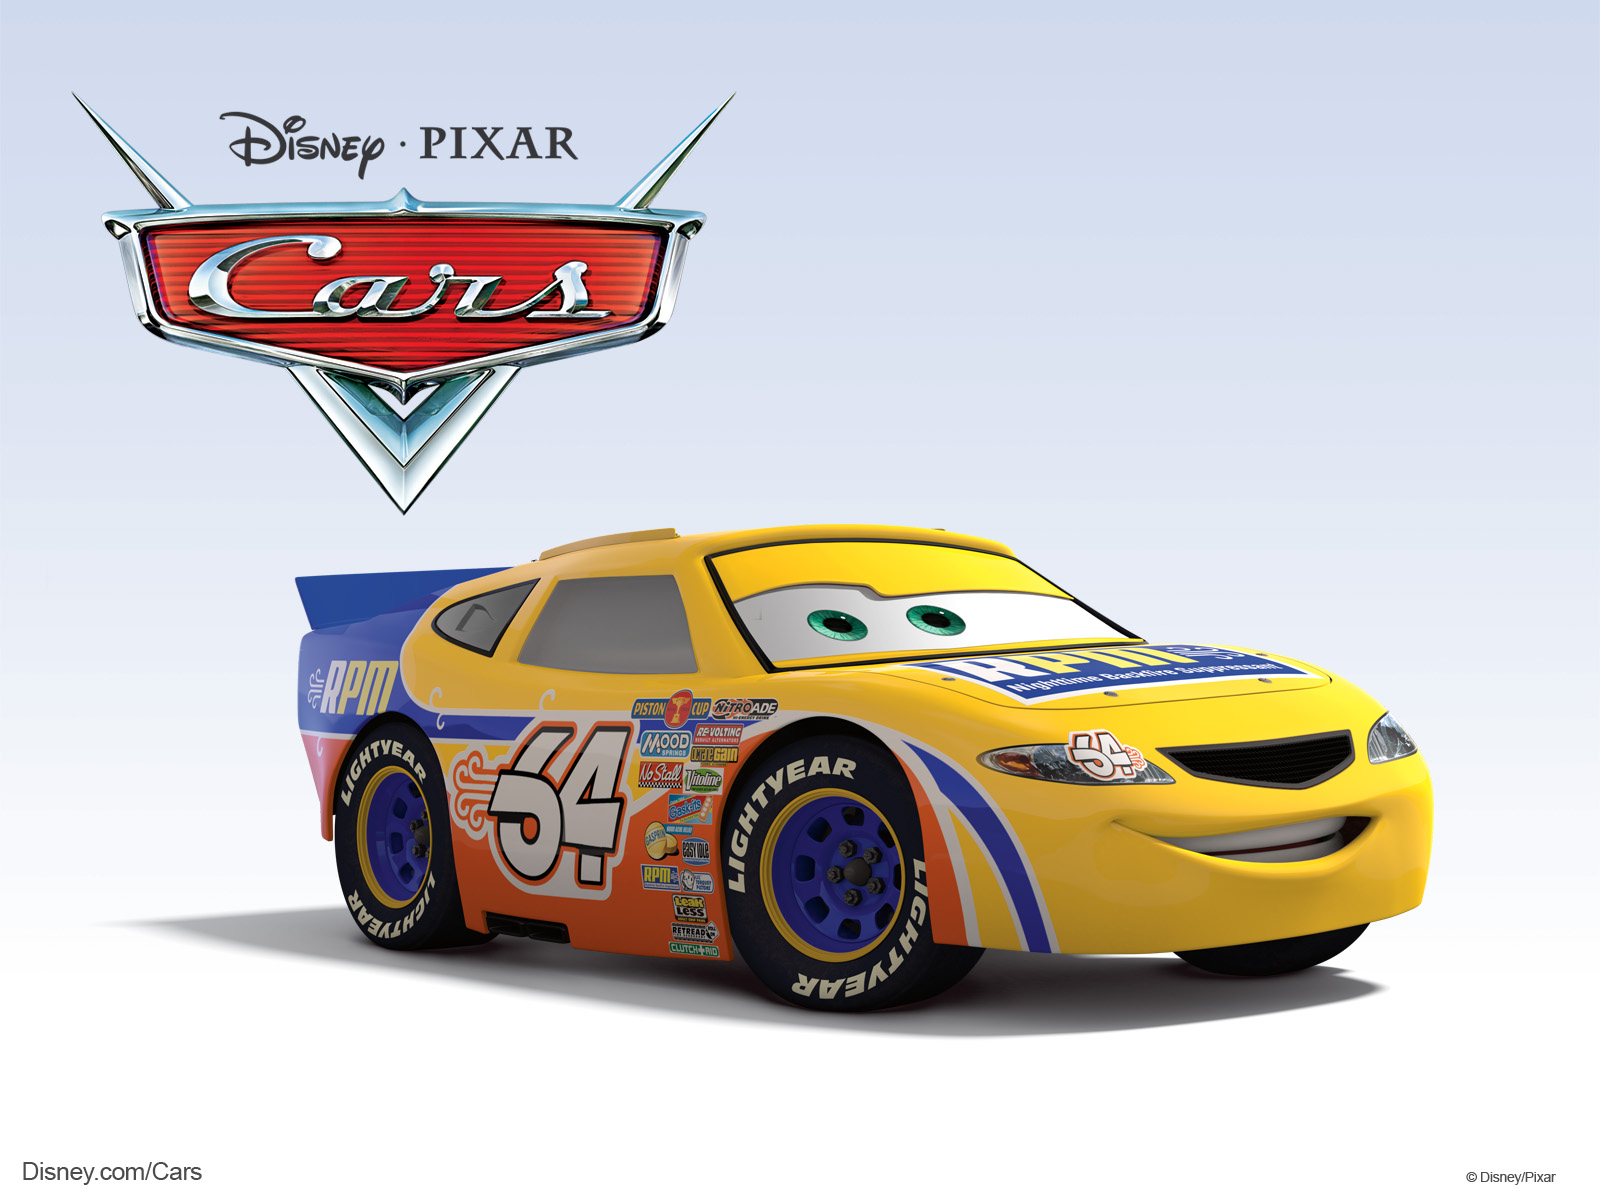 Winford Rutherford The Rpm Race Car From The Disney/pixar - Disney Cars Pixar  Characters - 1600x1200 Wallpaper 